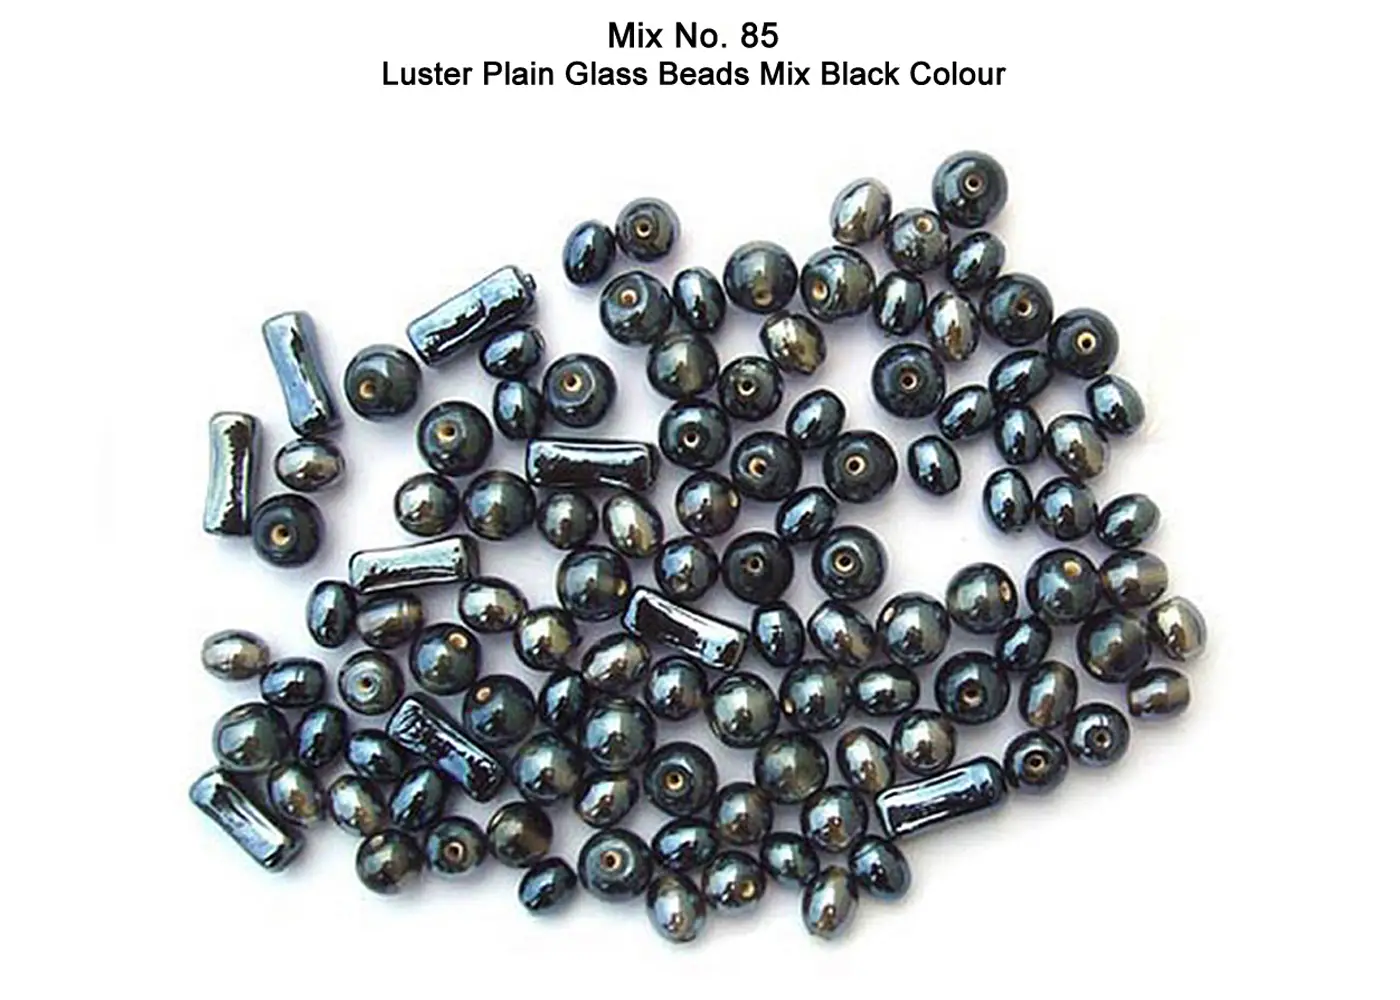 Luster Plain Beads in Black color